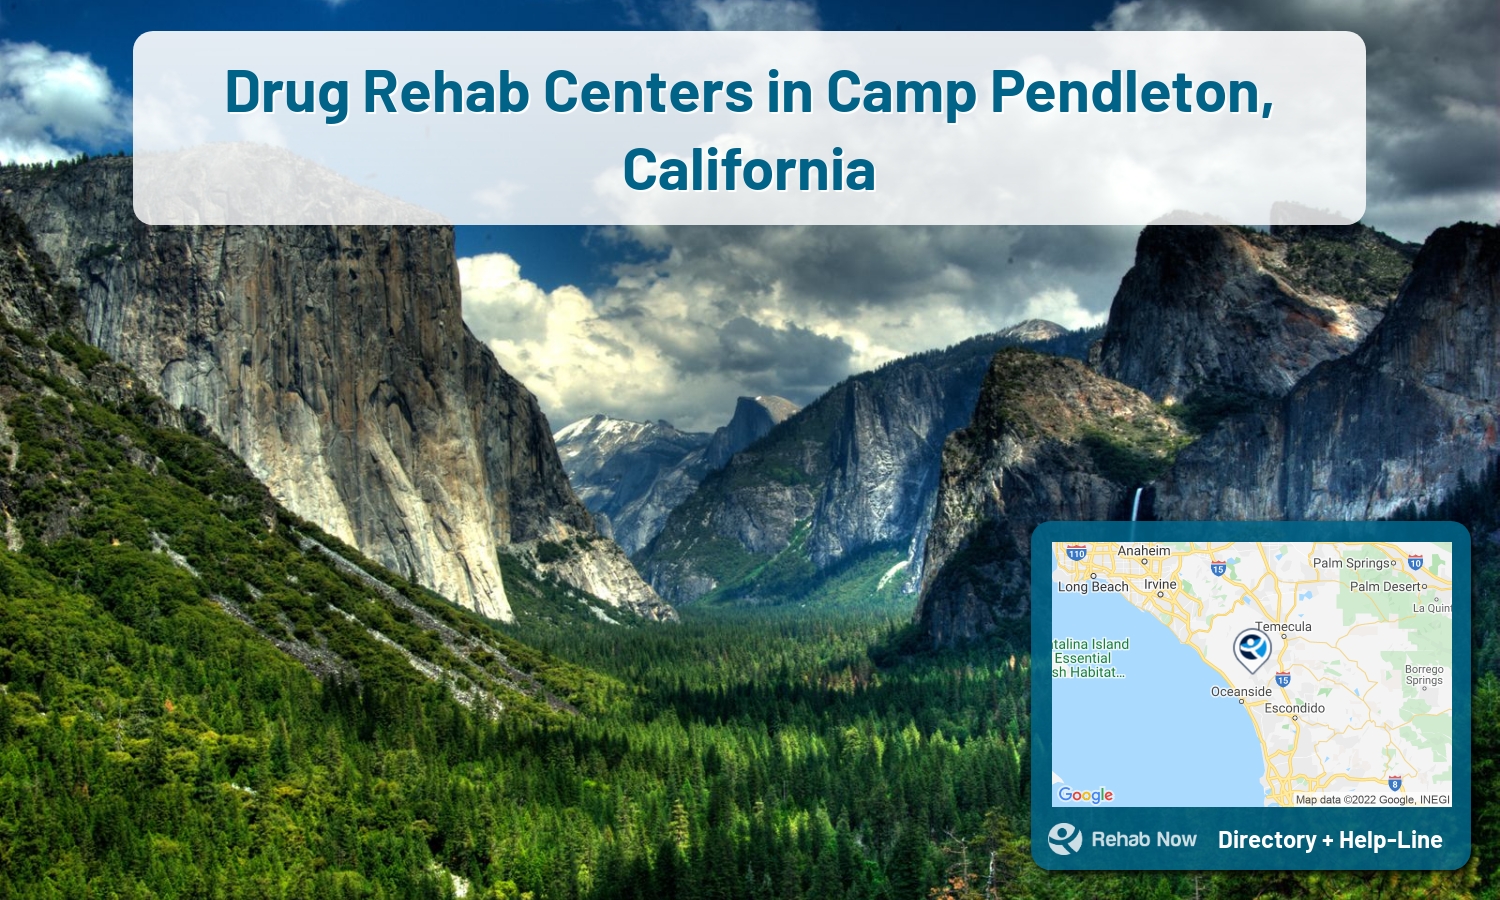 Find drug rehab and alcohol treatment services in Camp Pendleton. Our experts help you find a center in Camp Pendleton, California